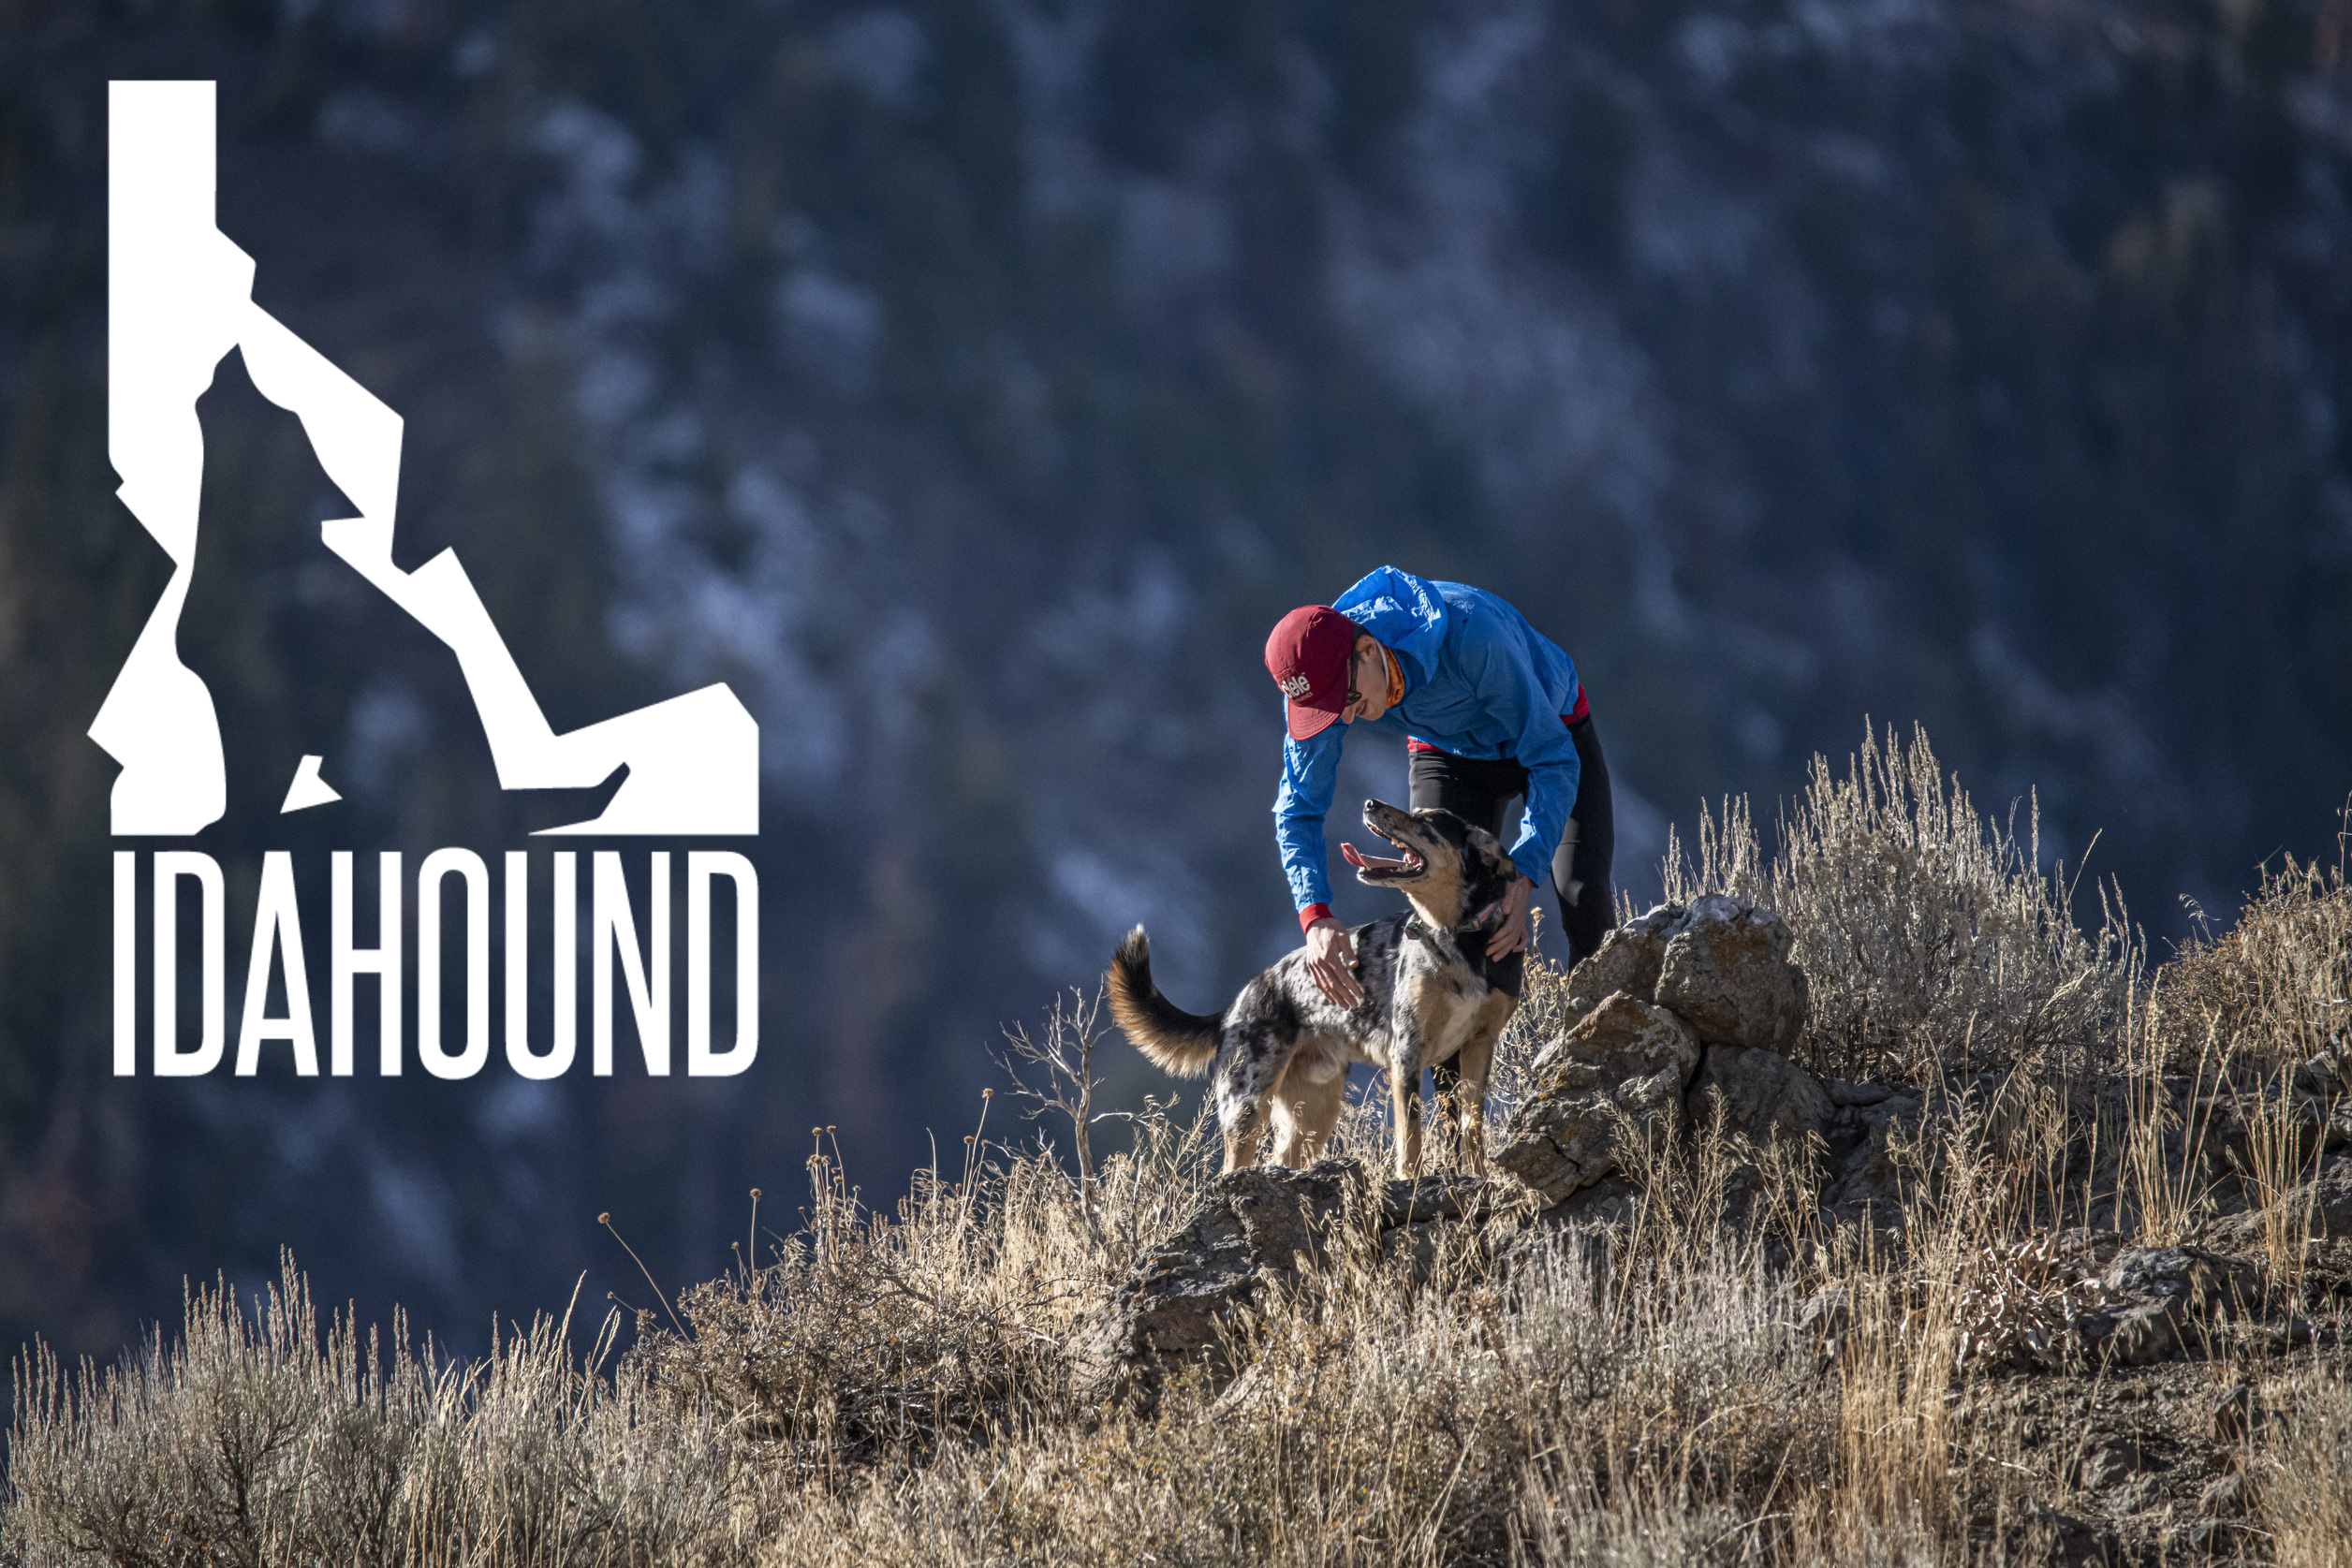 Exploring nature with our dogs means feeding them right, while also respecting the land. Idahound foods come from a spirit of adventure and compassion.